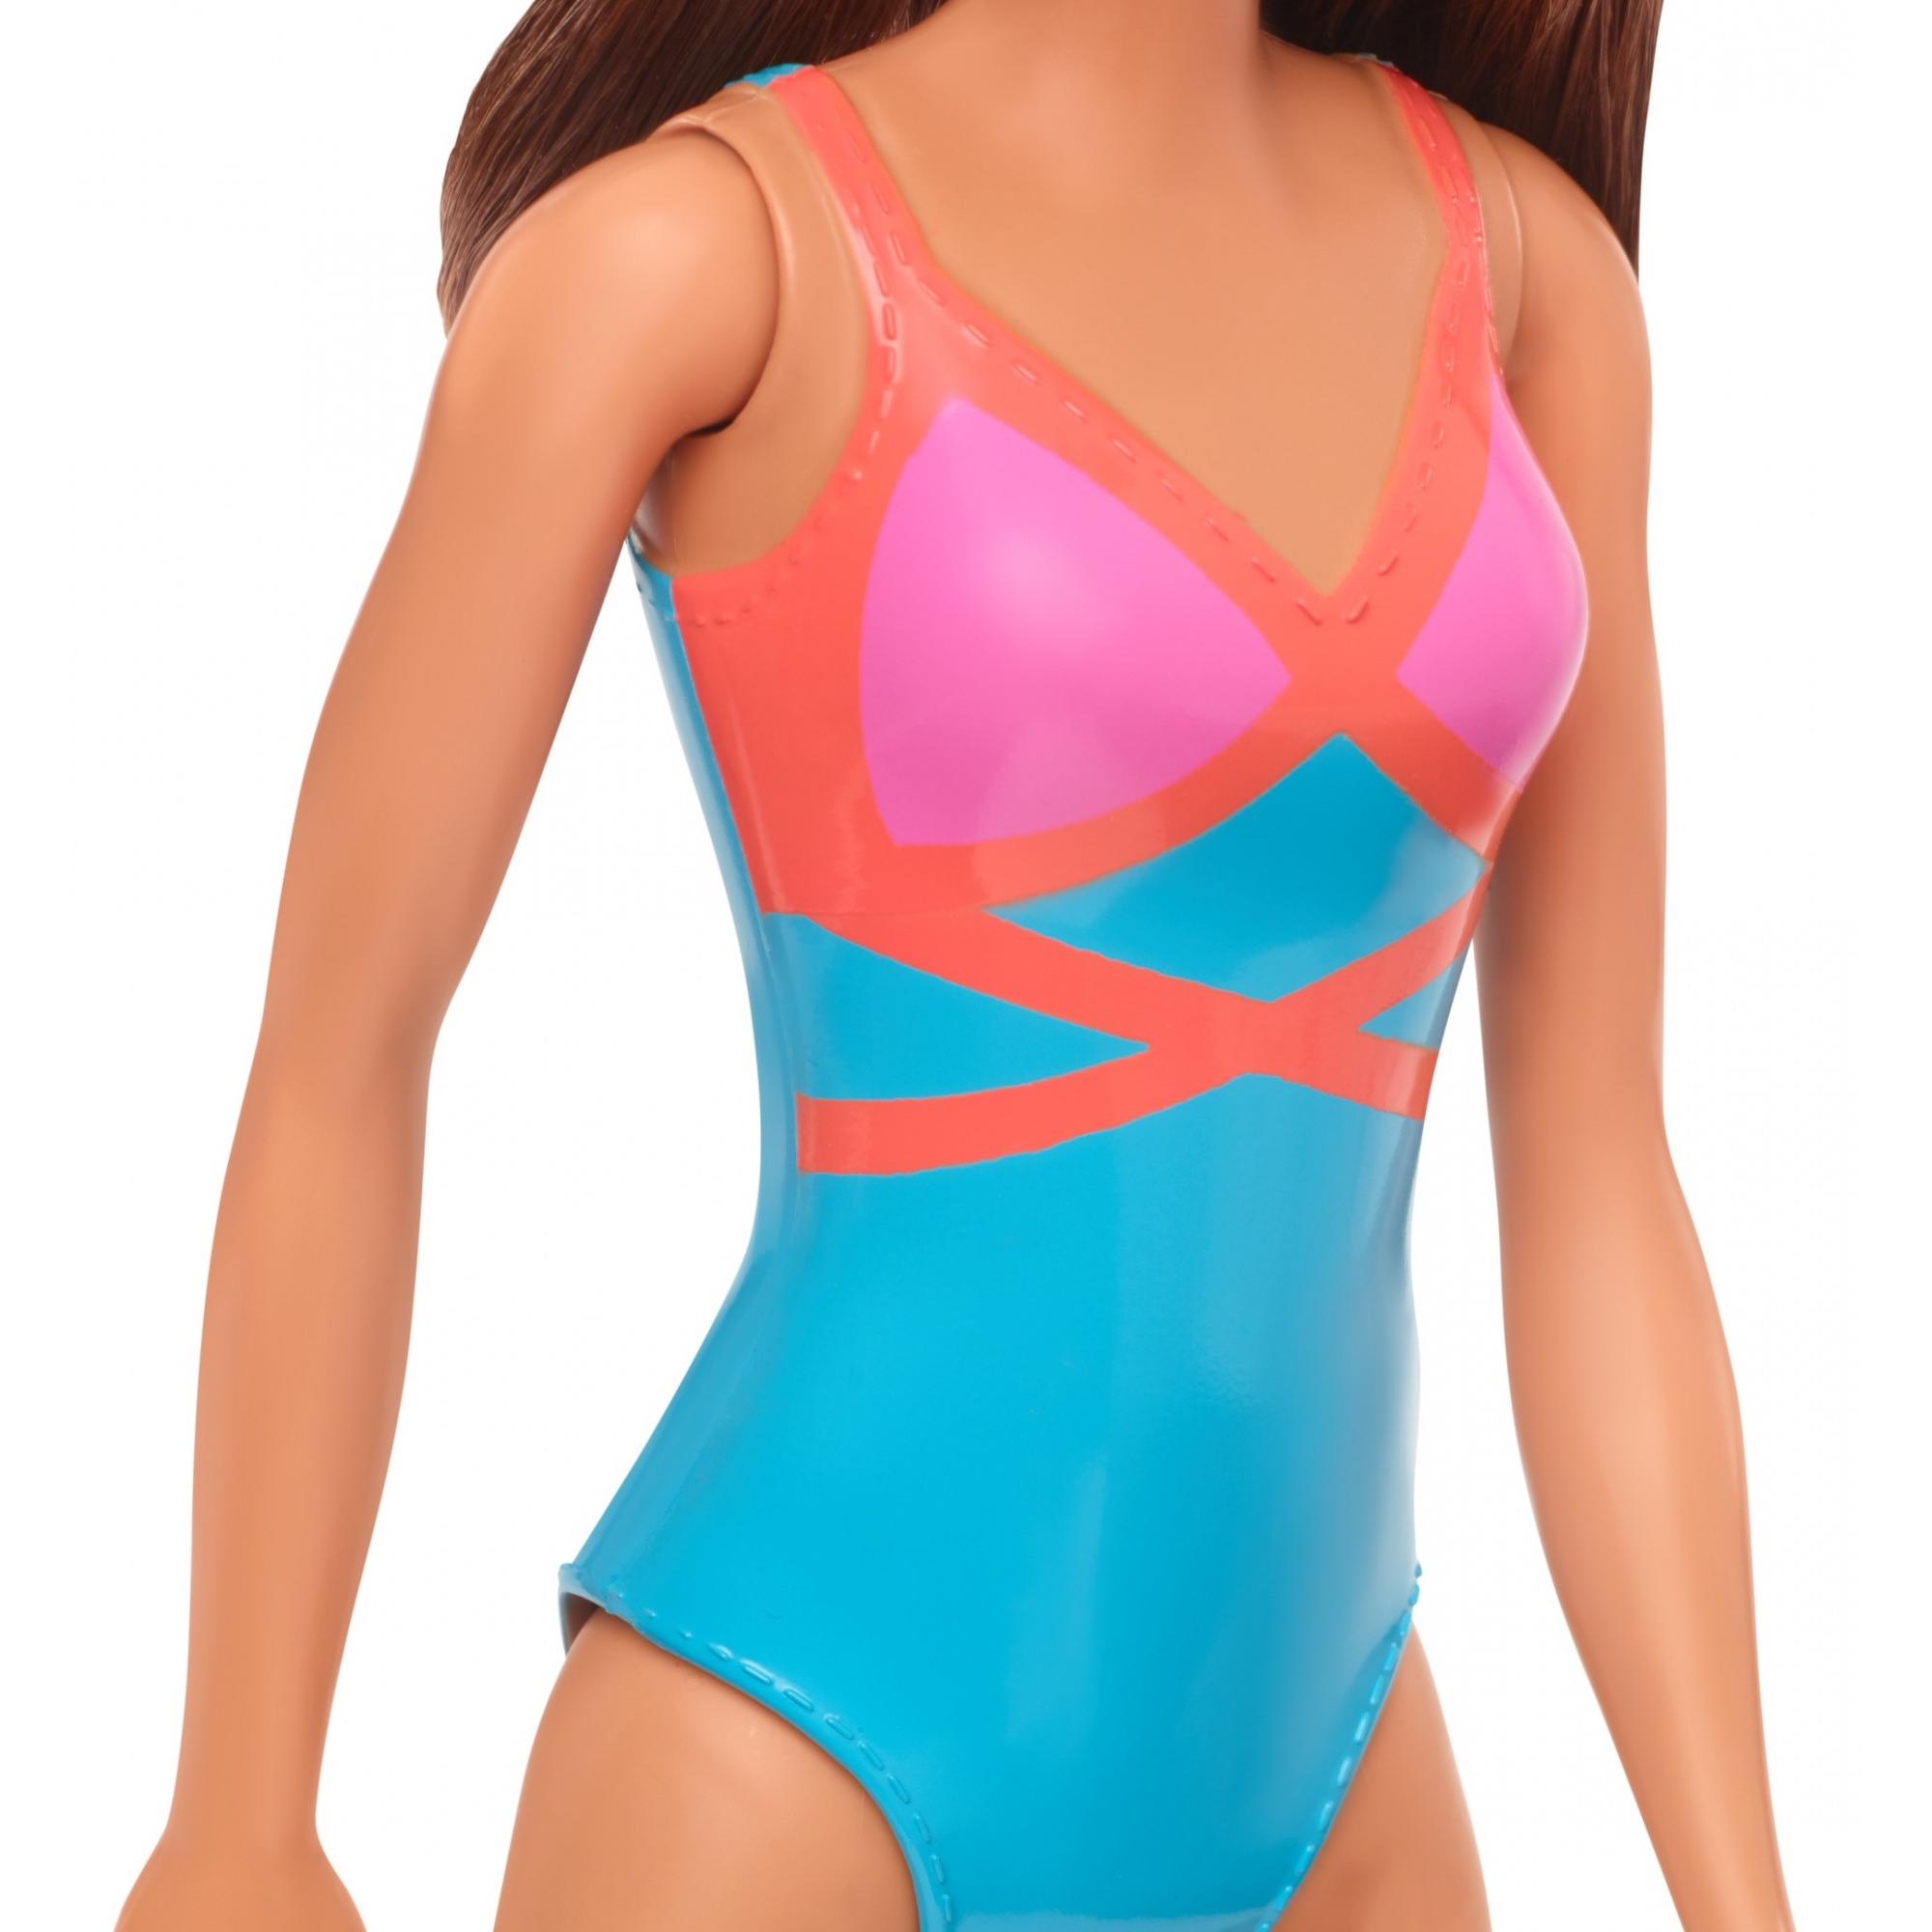 Barbie Doll, Brunette, Wearing Swimsuit, For Kids 3 To 7 Years Old, Brunette - image 3 of 6